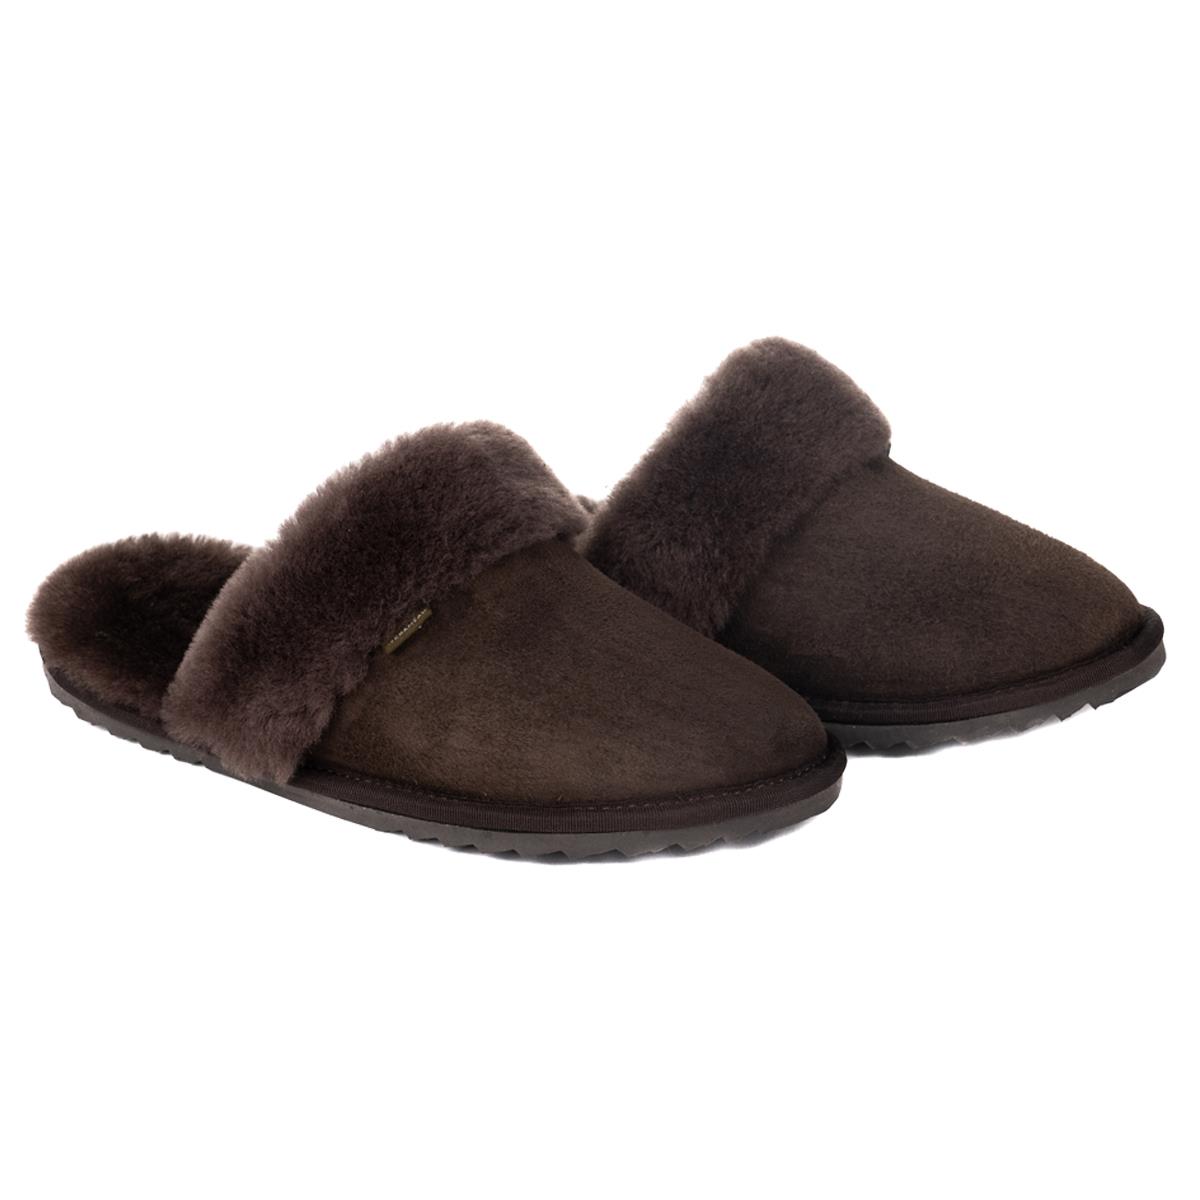 What is size medium in the Le Chameau Womens Mule Maison Slippers?